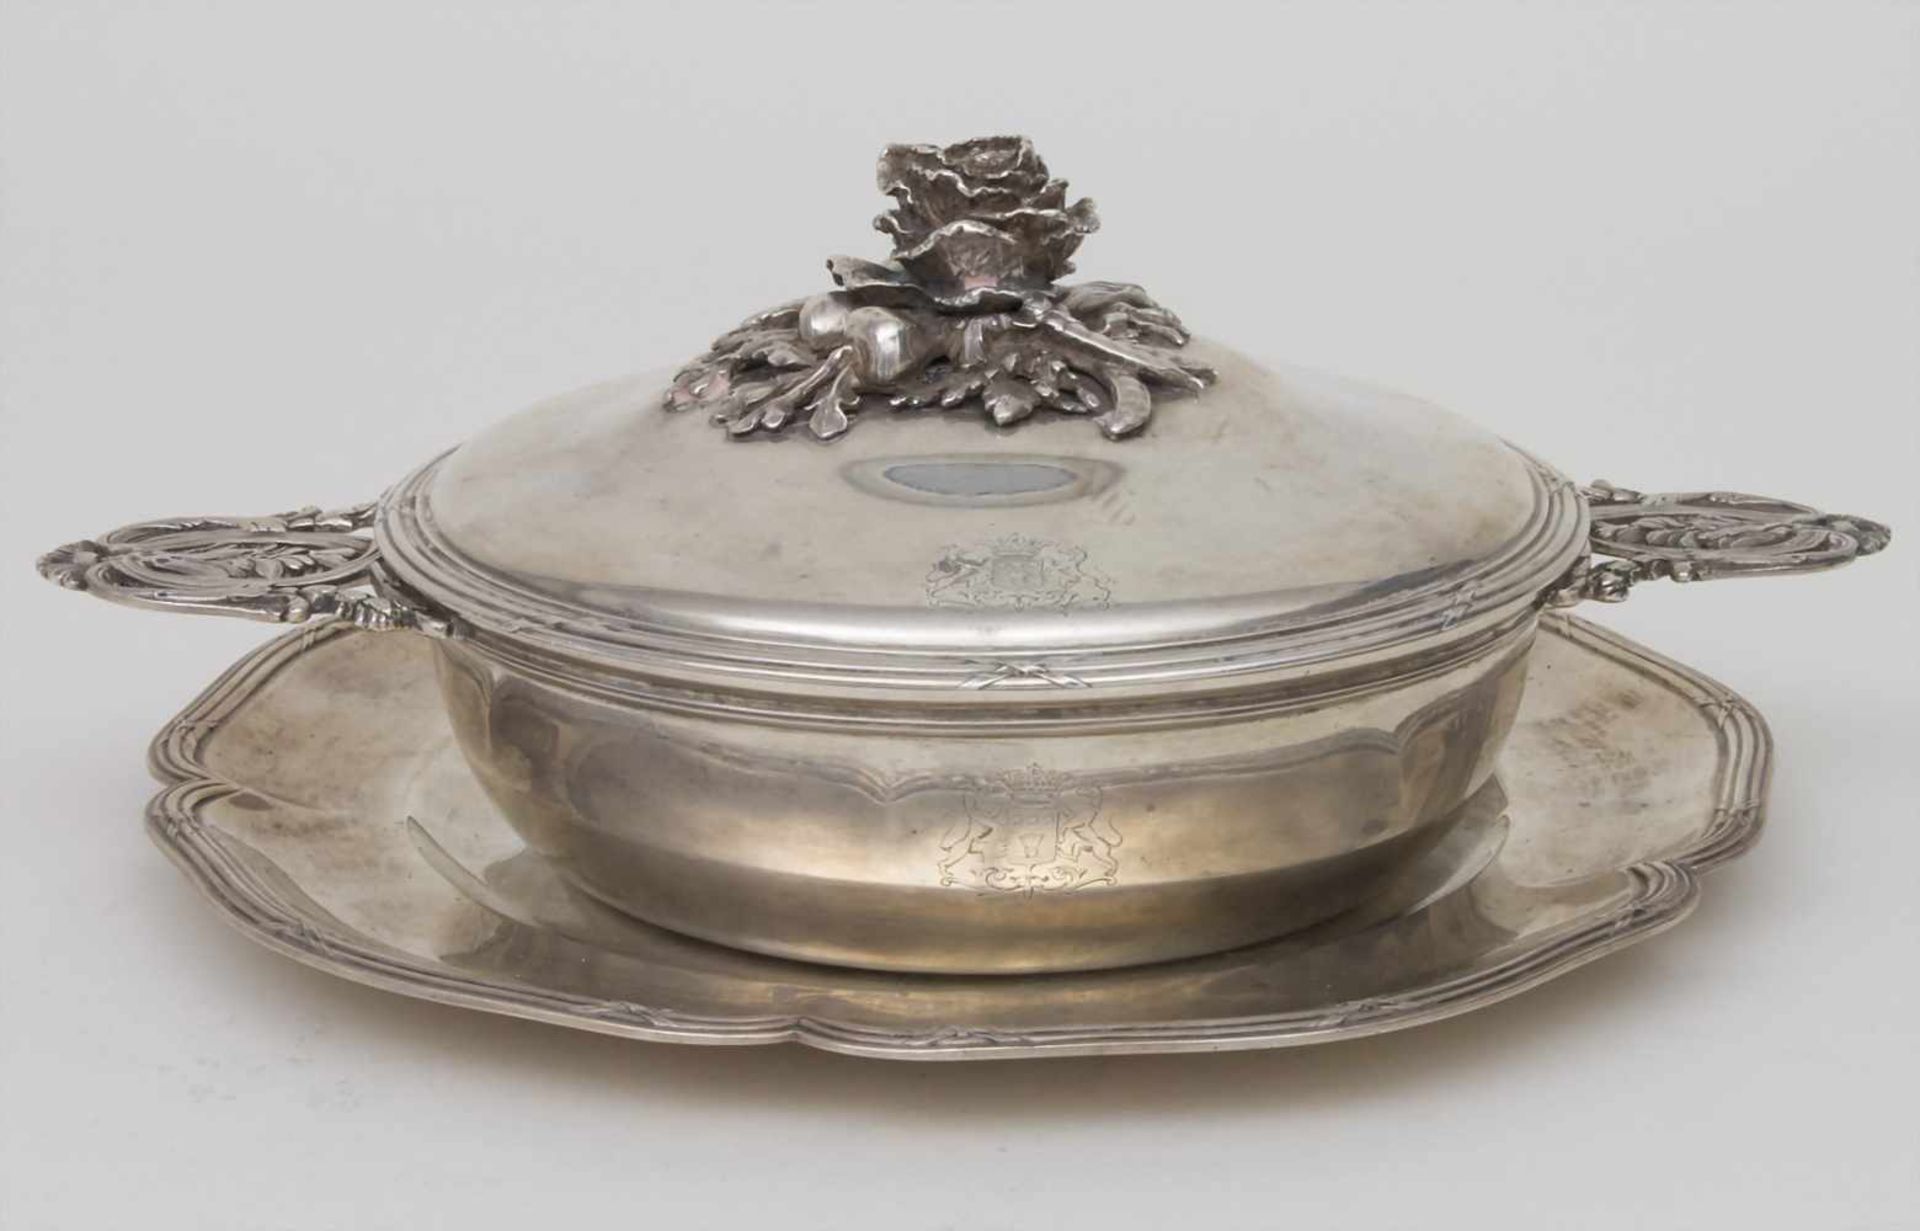 Legumier / Wöchnerinnenschüssel / A silver vegetable tureen with lining and cover, Stanislas Pollet, - Image 12 of 17